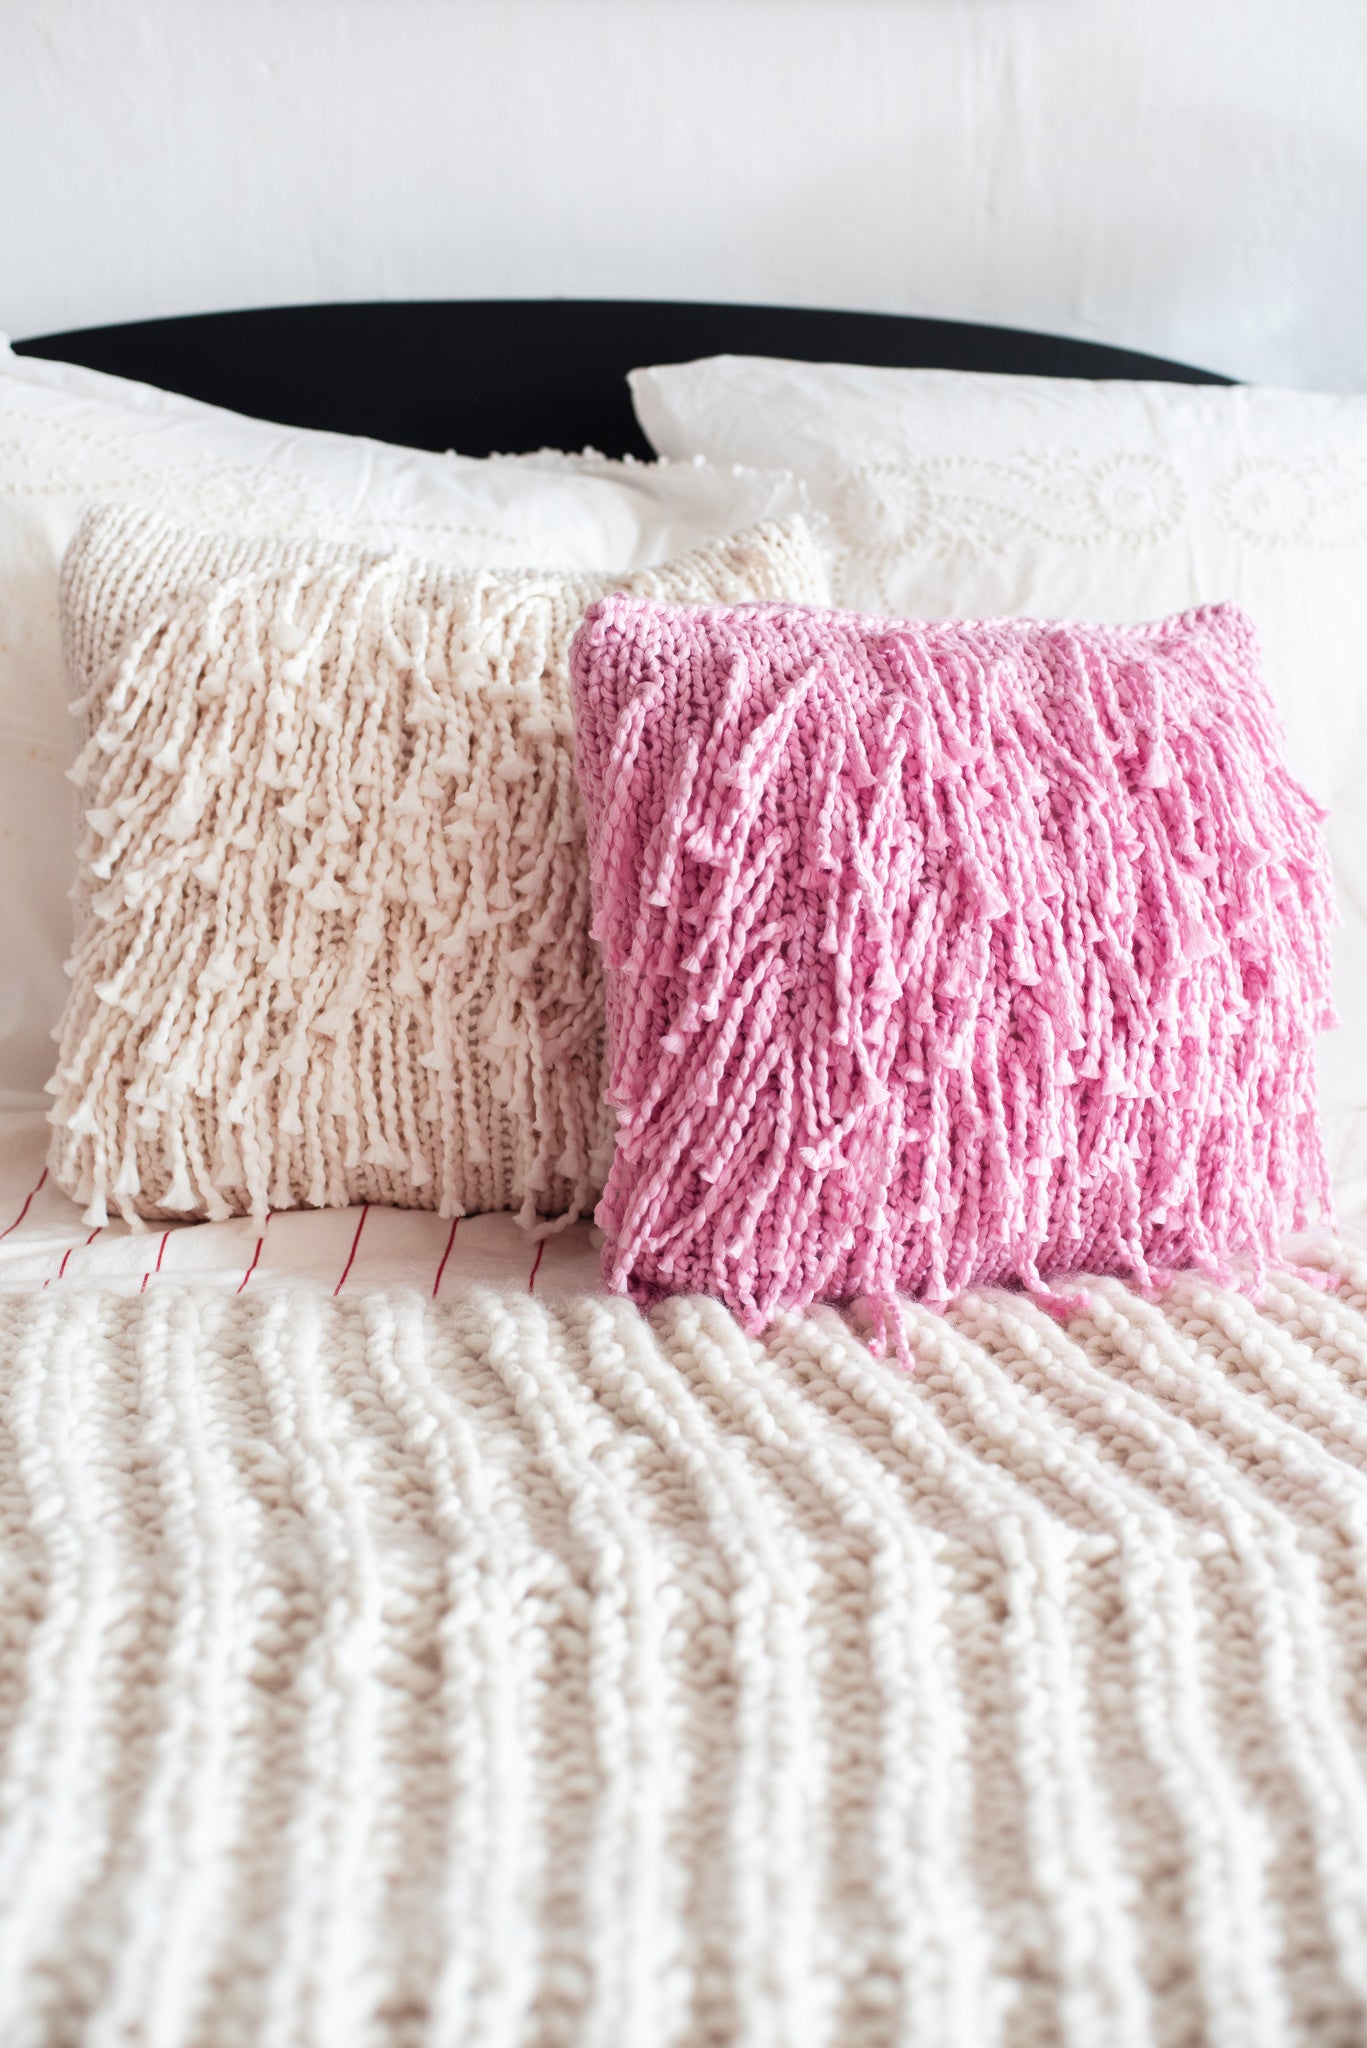 Support pillows from merino pillows 